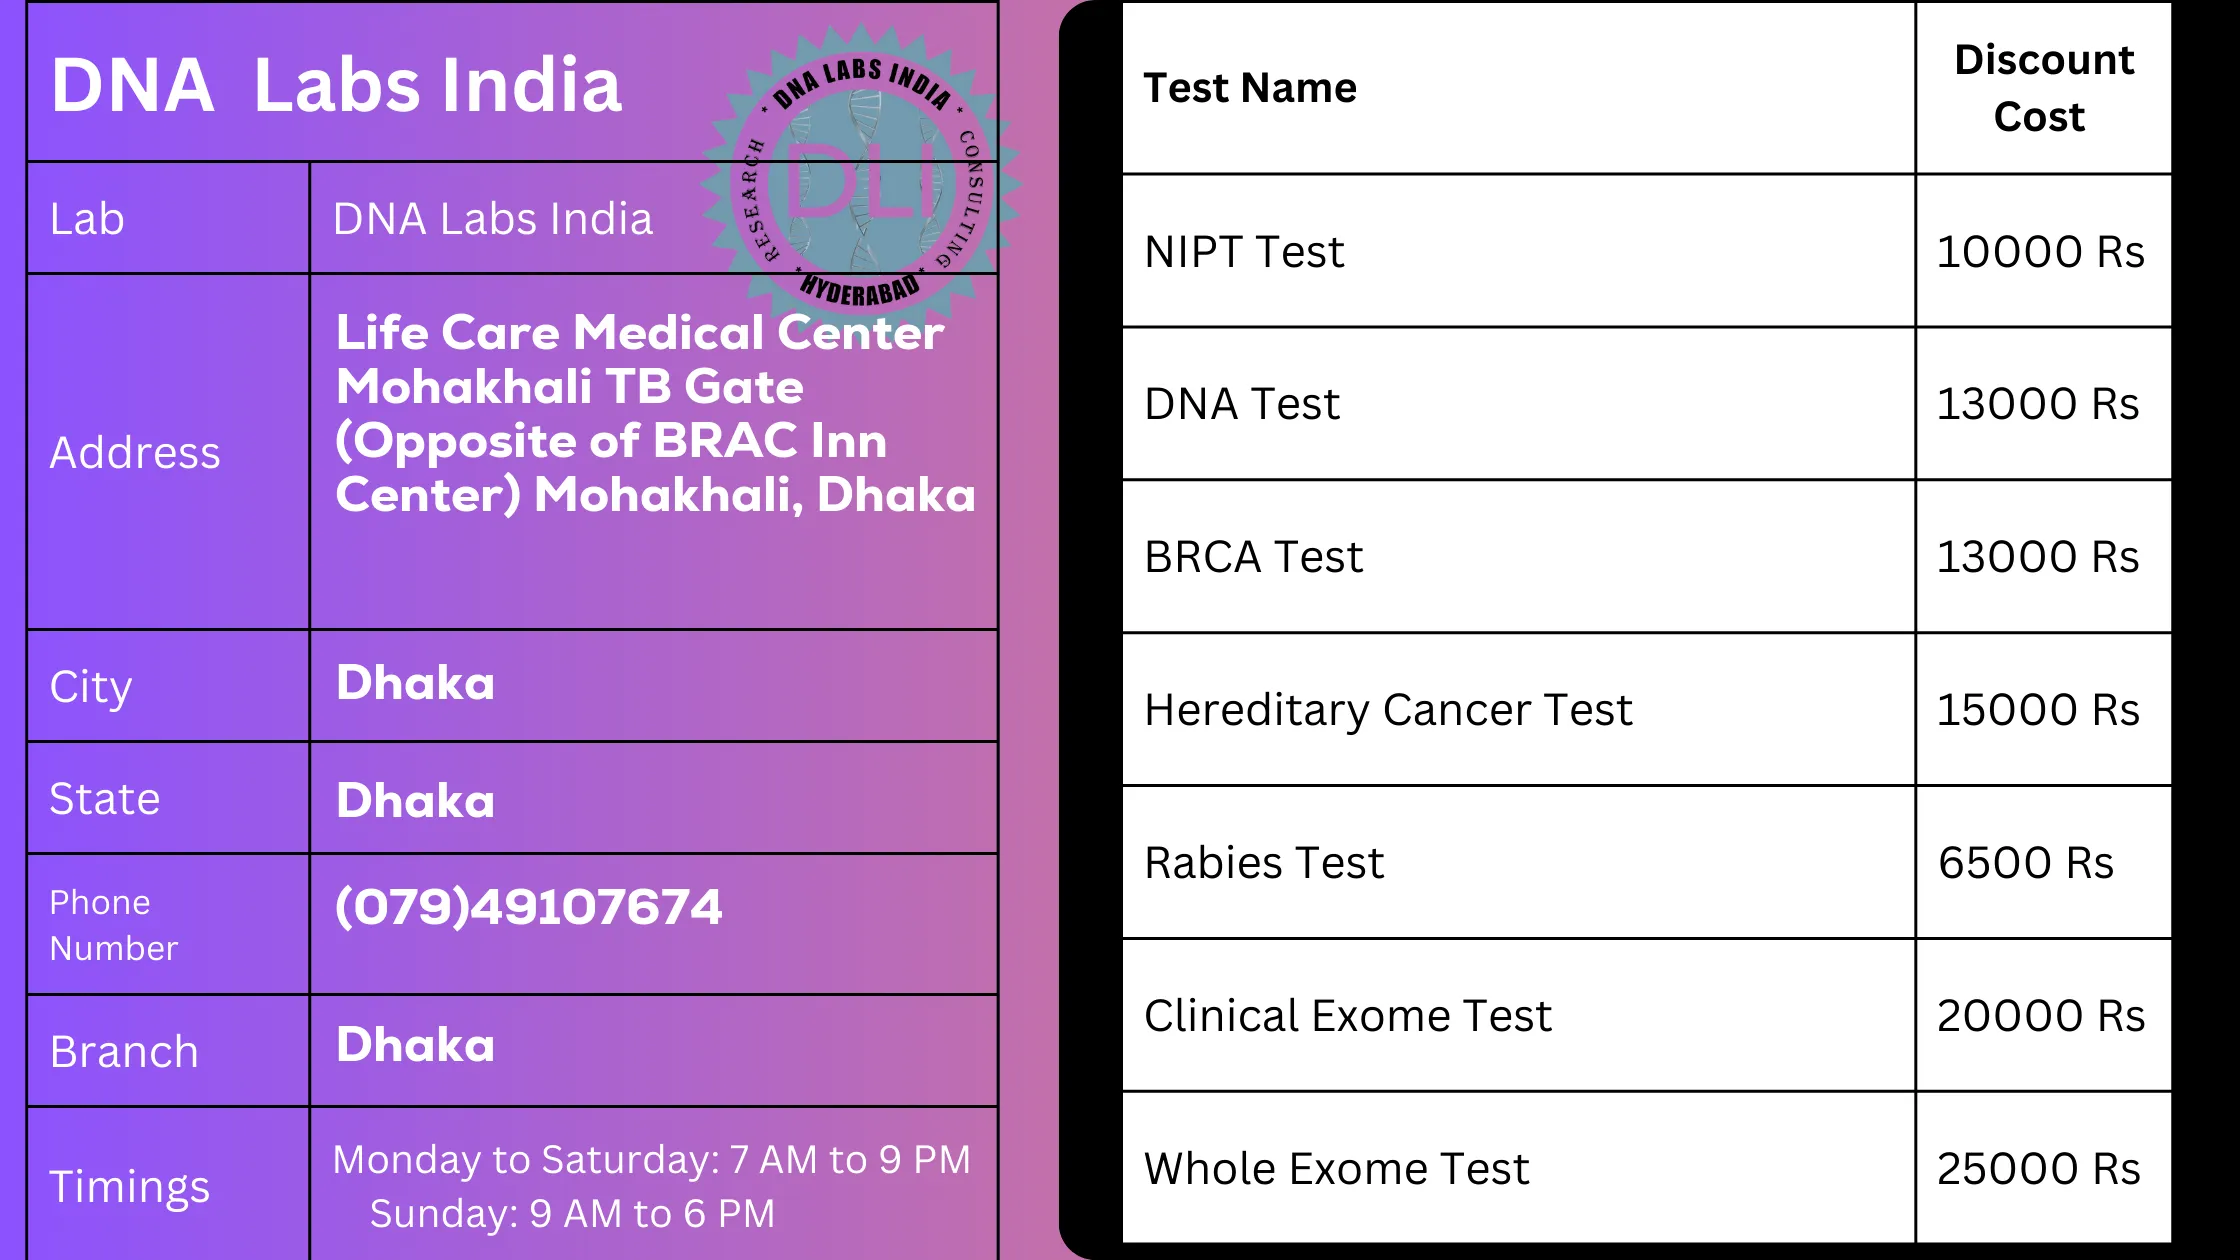 DNA Labs India - Genetic Testing Services in Dhaka